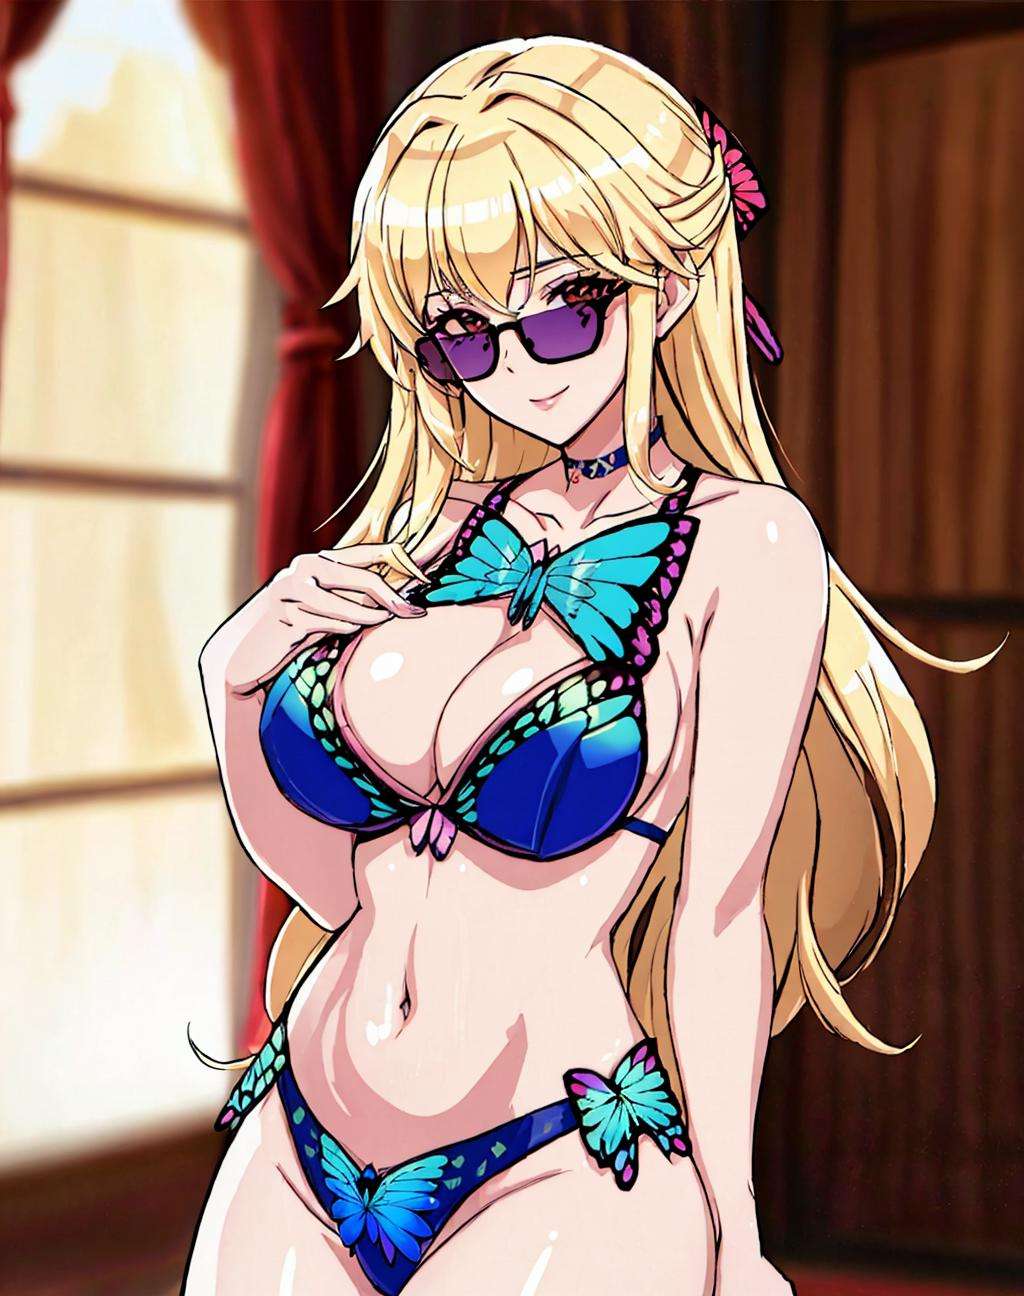 4K, Masterpiece, highres, absurdres,natural volumetric lighting and best shadows, deep depth of field, sharp focus, smiling,soft delicate beautiful attractive face,(edgCoquine:1.1), butterfly_top, blonde (Nadia with sunglasses) and a choker, in a colored sexy attire, see through fabric over the navel ,wearing [edgCoquine|butterfly_top],(butterfly design embroidery:1.2), (cowboy shot:1.3) , <lora:Nadia:0.35> <lora:zeronis:0.7> <lora:DitaStyle-000005:0.5>  <lora:PapillonCoquin:0.7>